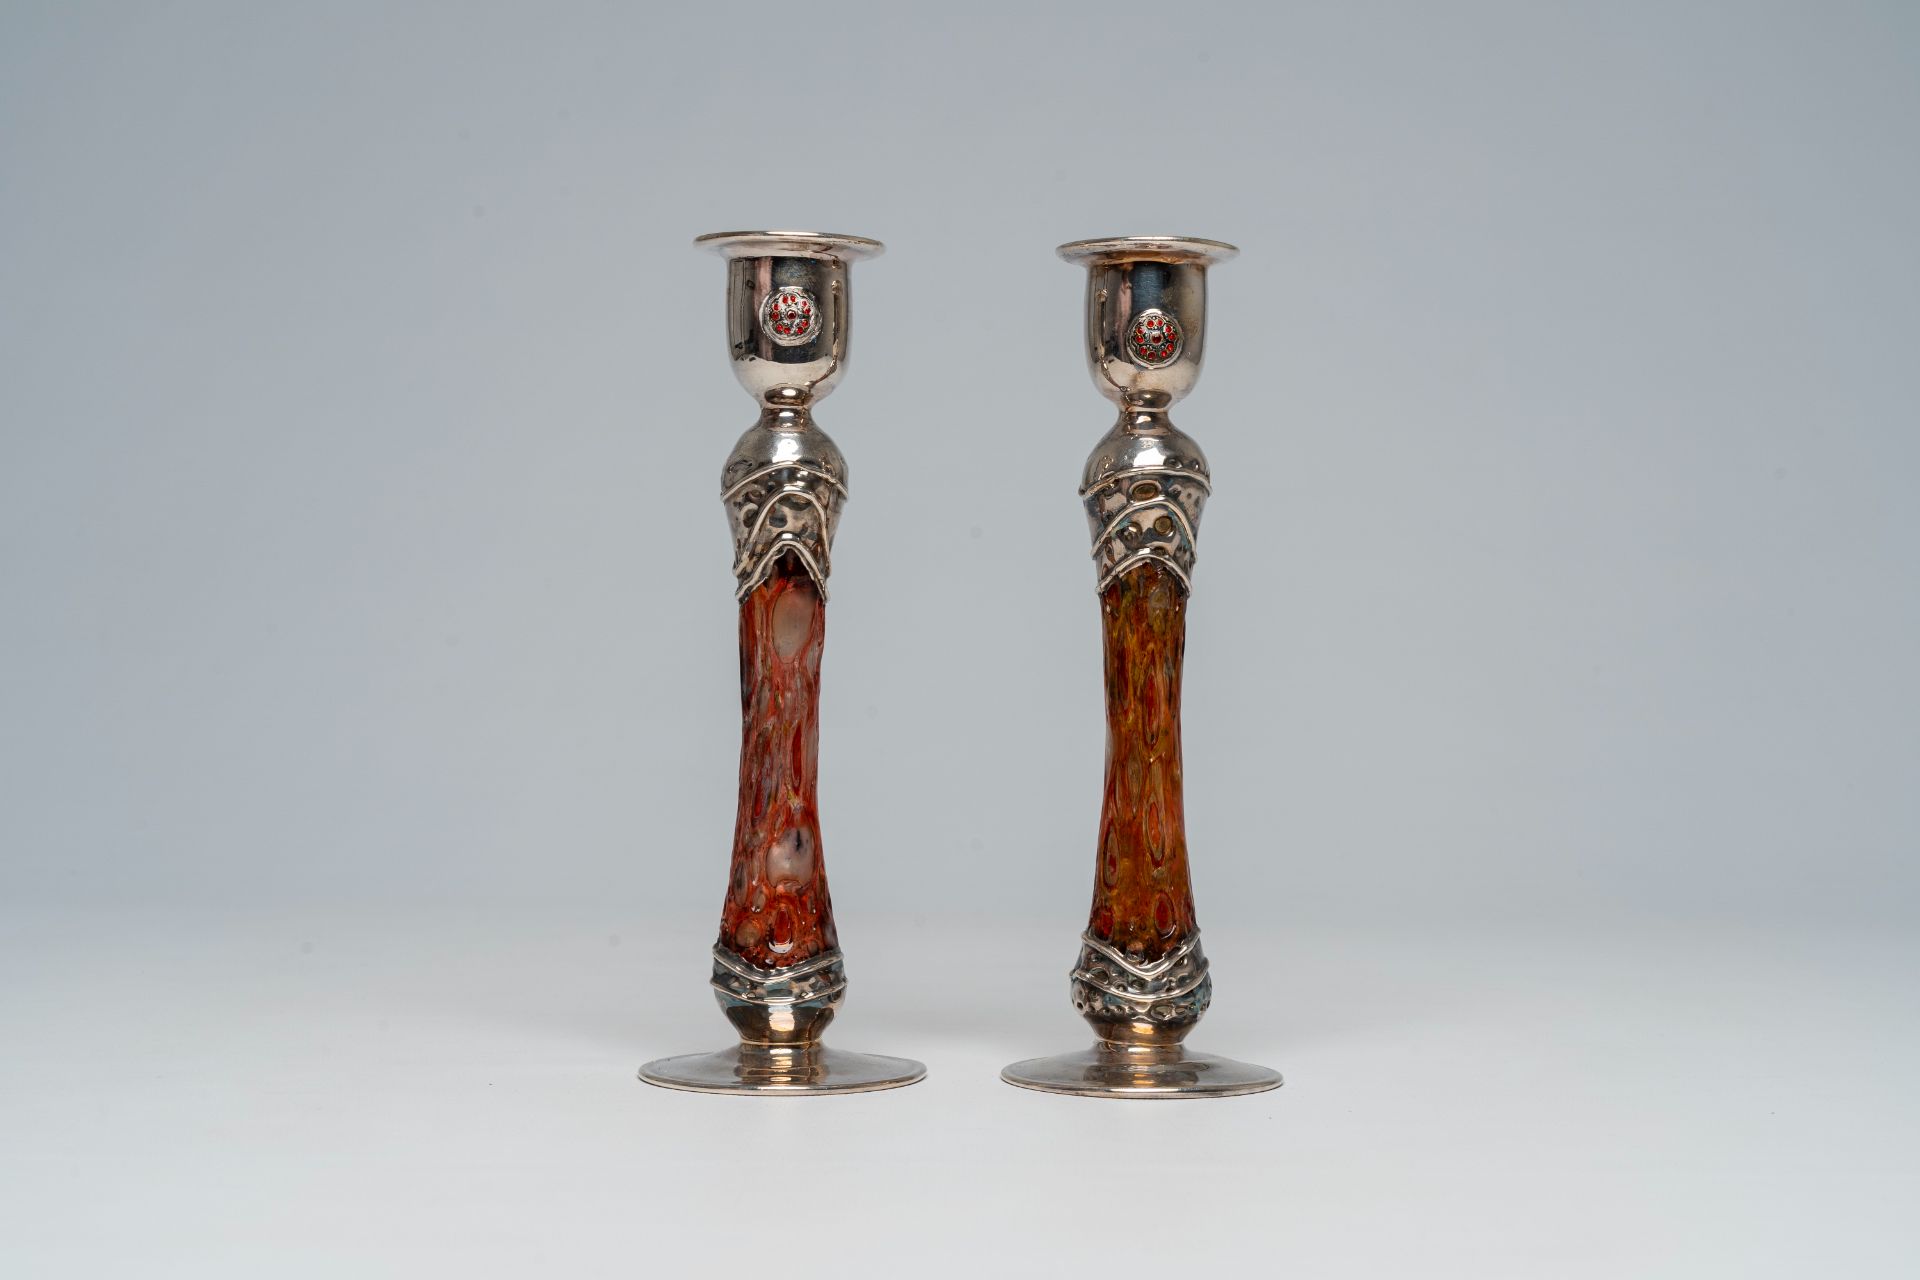 A pair of English or Scottish Arts & Crafts style silver and glass candlesticks, 20th C.